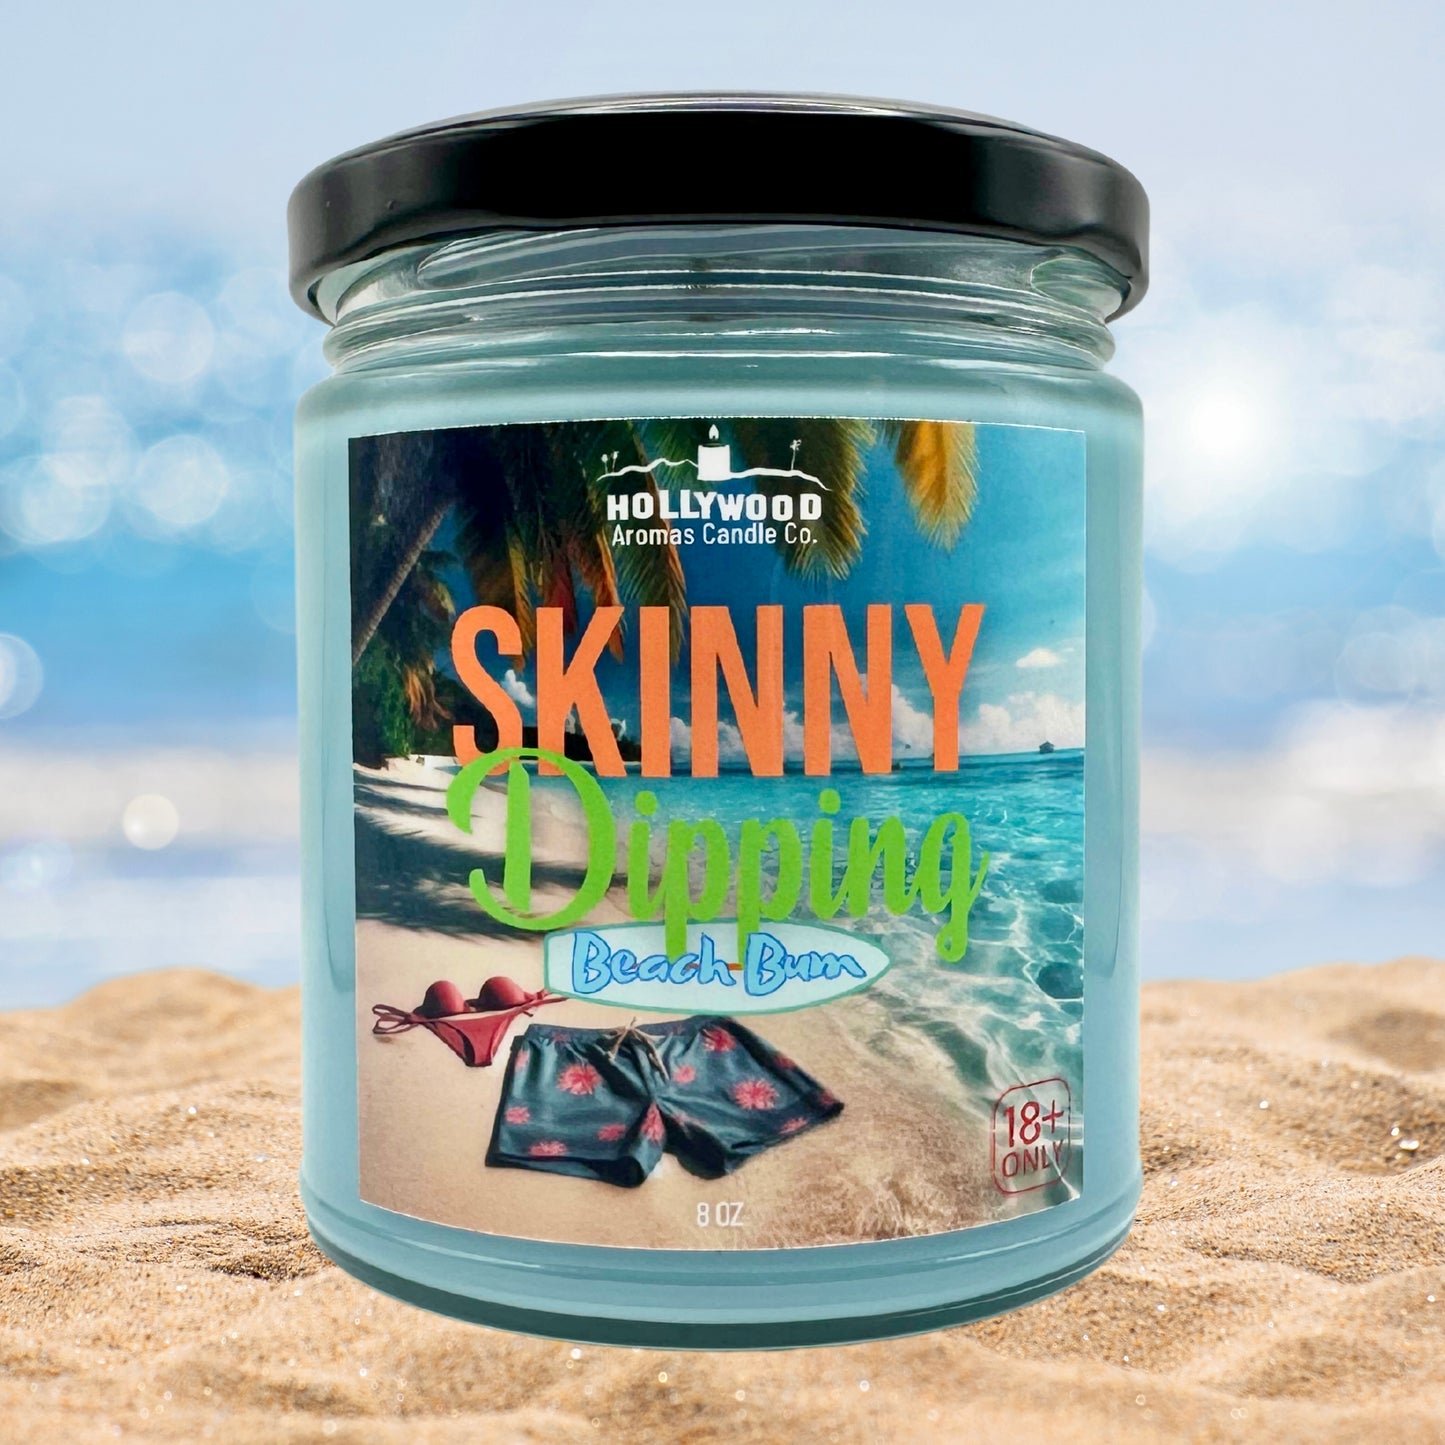 Skinny Dipping Adult Candle (Beach Bum Scented)